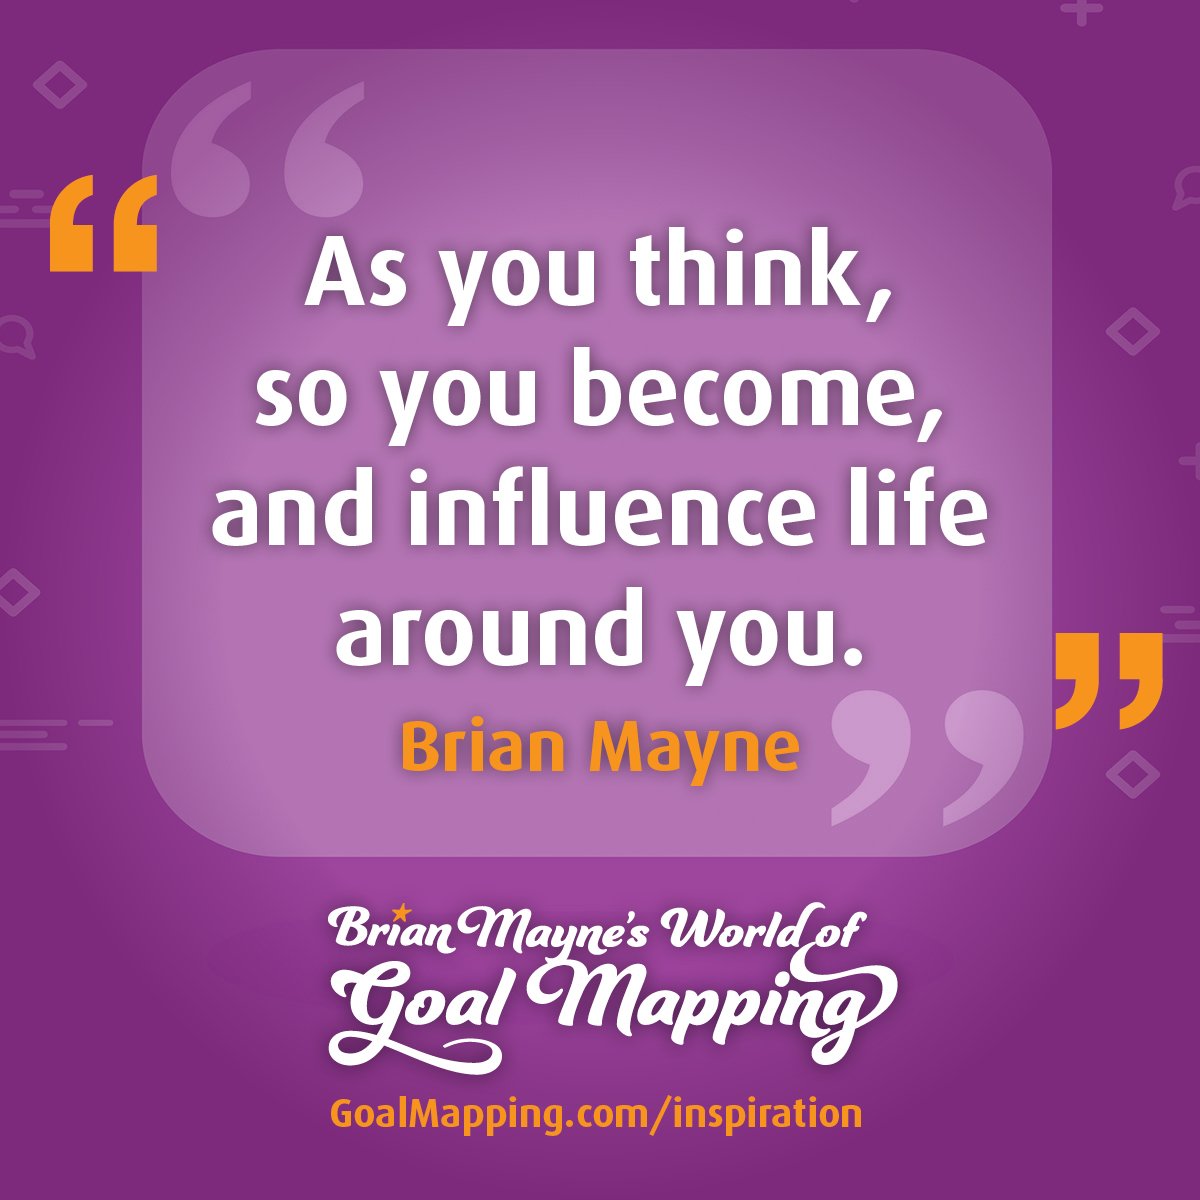 "As you think, so you become, and influence life around you." Brian Mayne